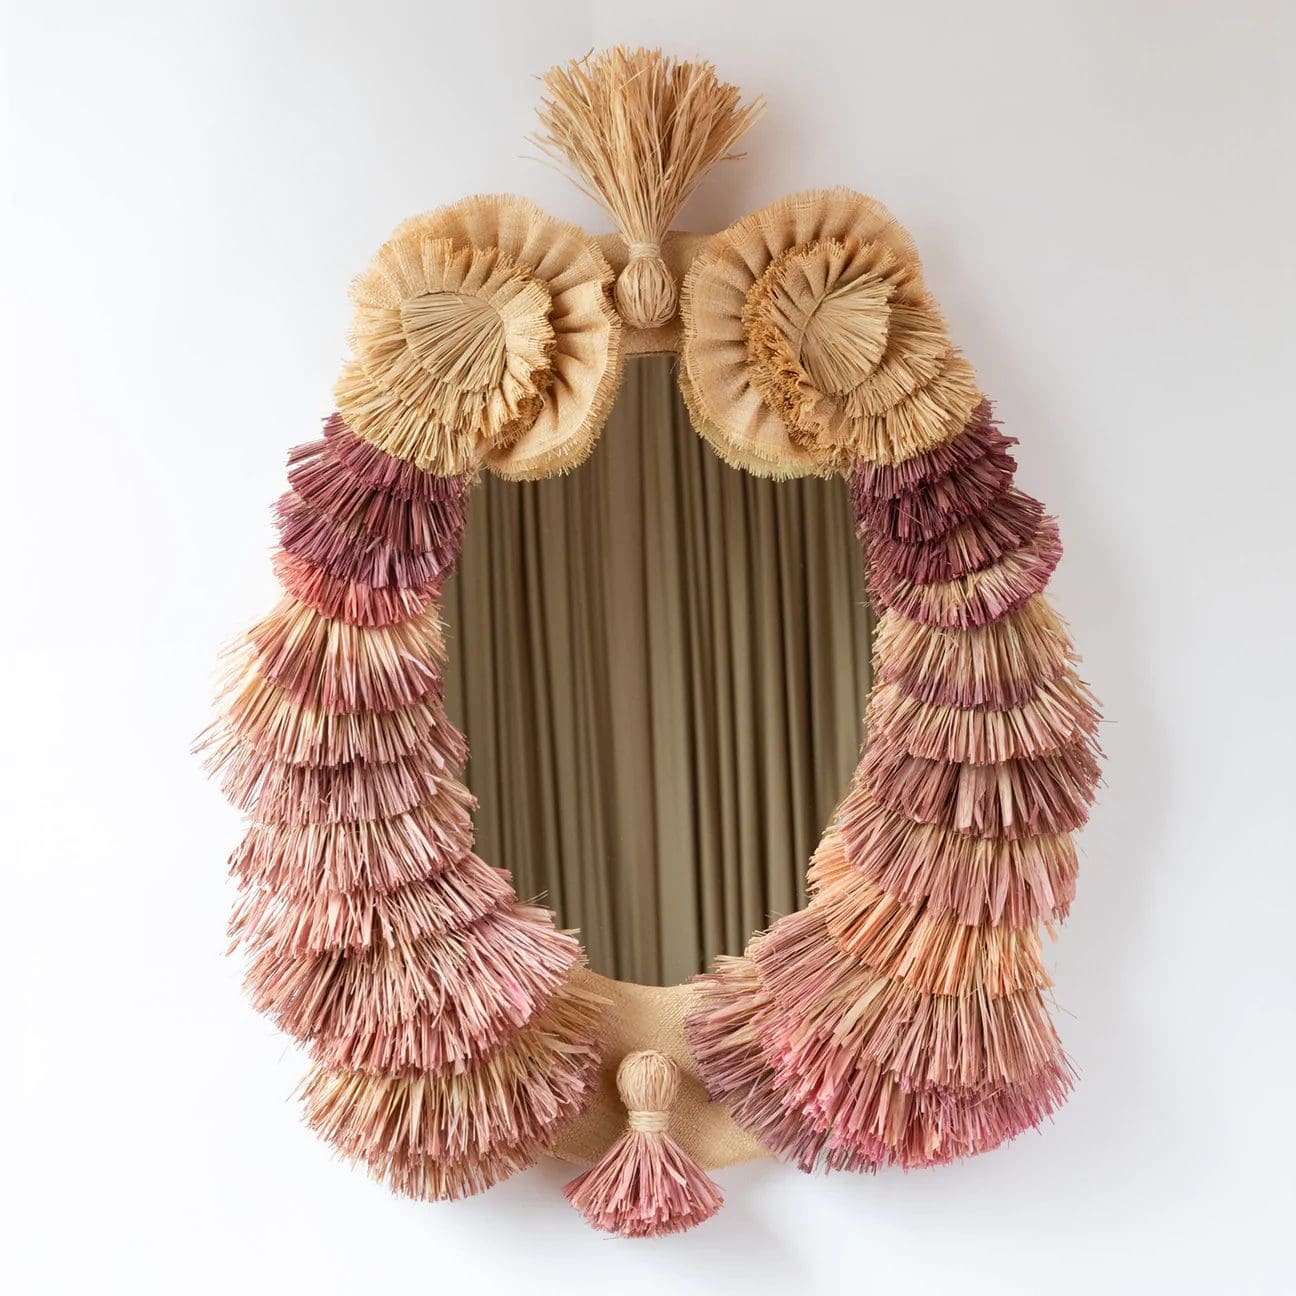 Lutfi Janania, Ampala, 2022, Fabricated wooden frame draped in woven palm fiber with hand-dyed, layered fringe fans and hand-tied flare bundles, 37 x 27 x 6 inches (94 x 68.6 x 15.2 cm)